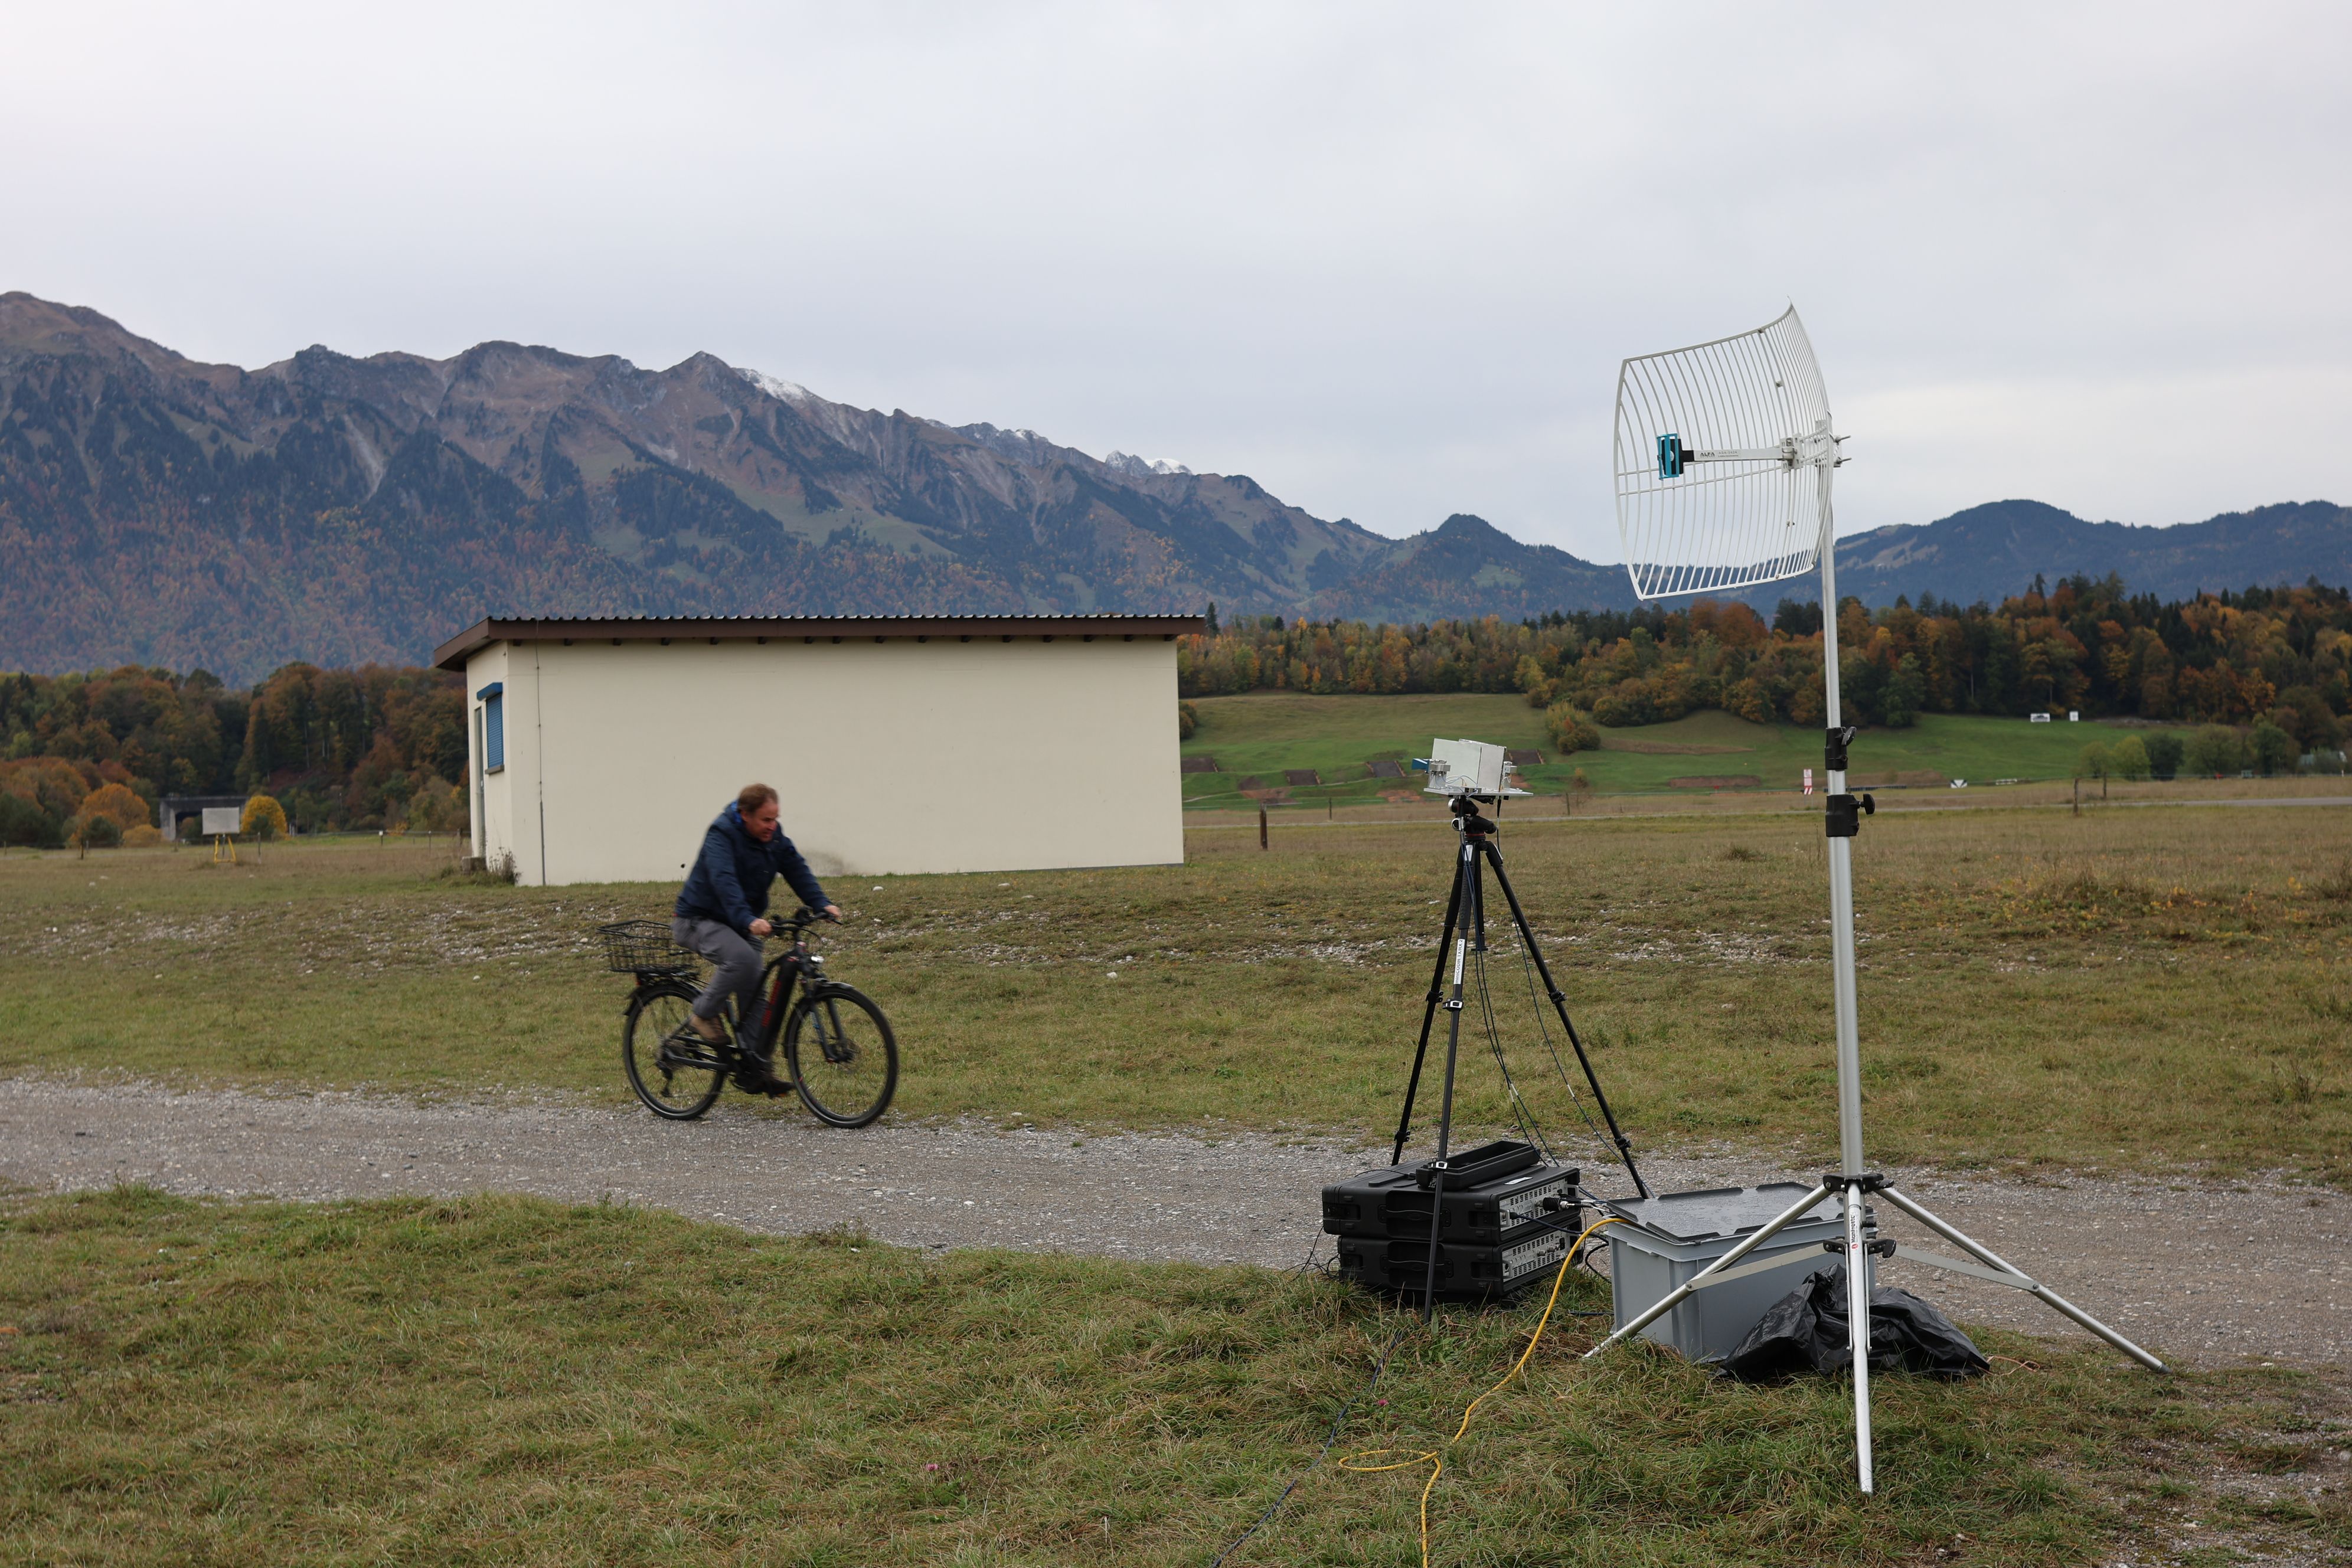 In the foreground, we can see two boxes, an antenna and a black tripod. A man approaches them on a bicycle, with a small house and nature in the background. 